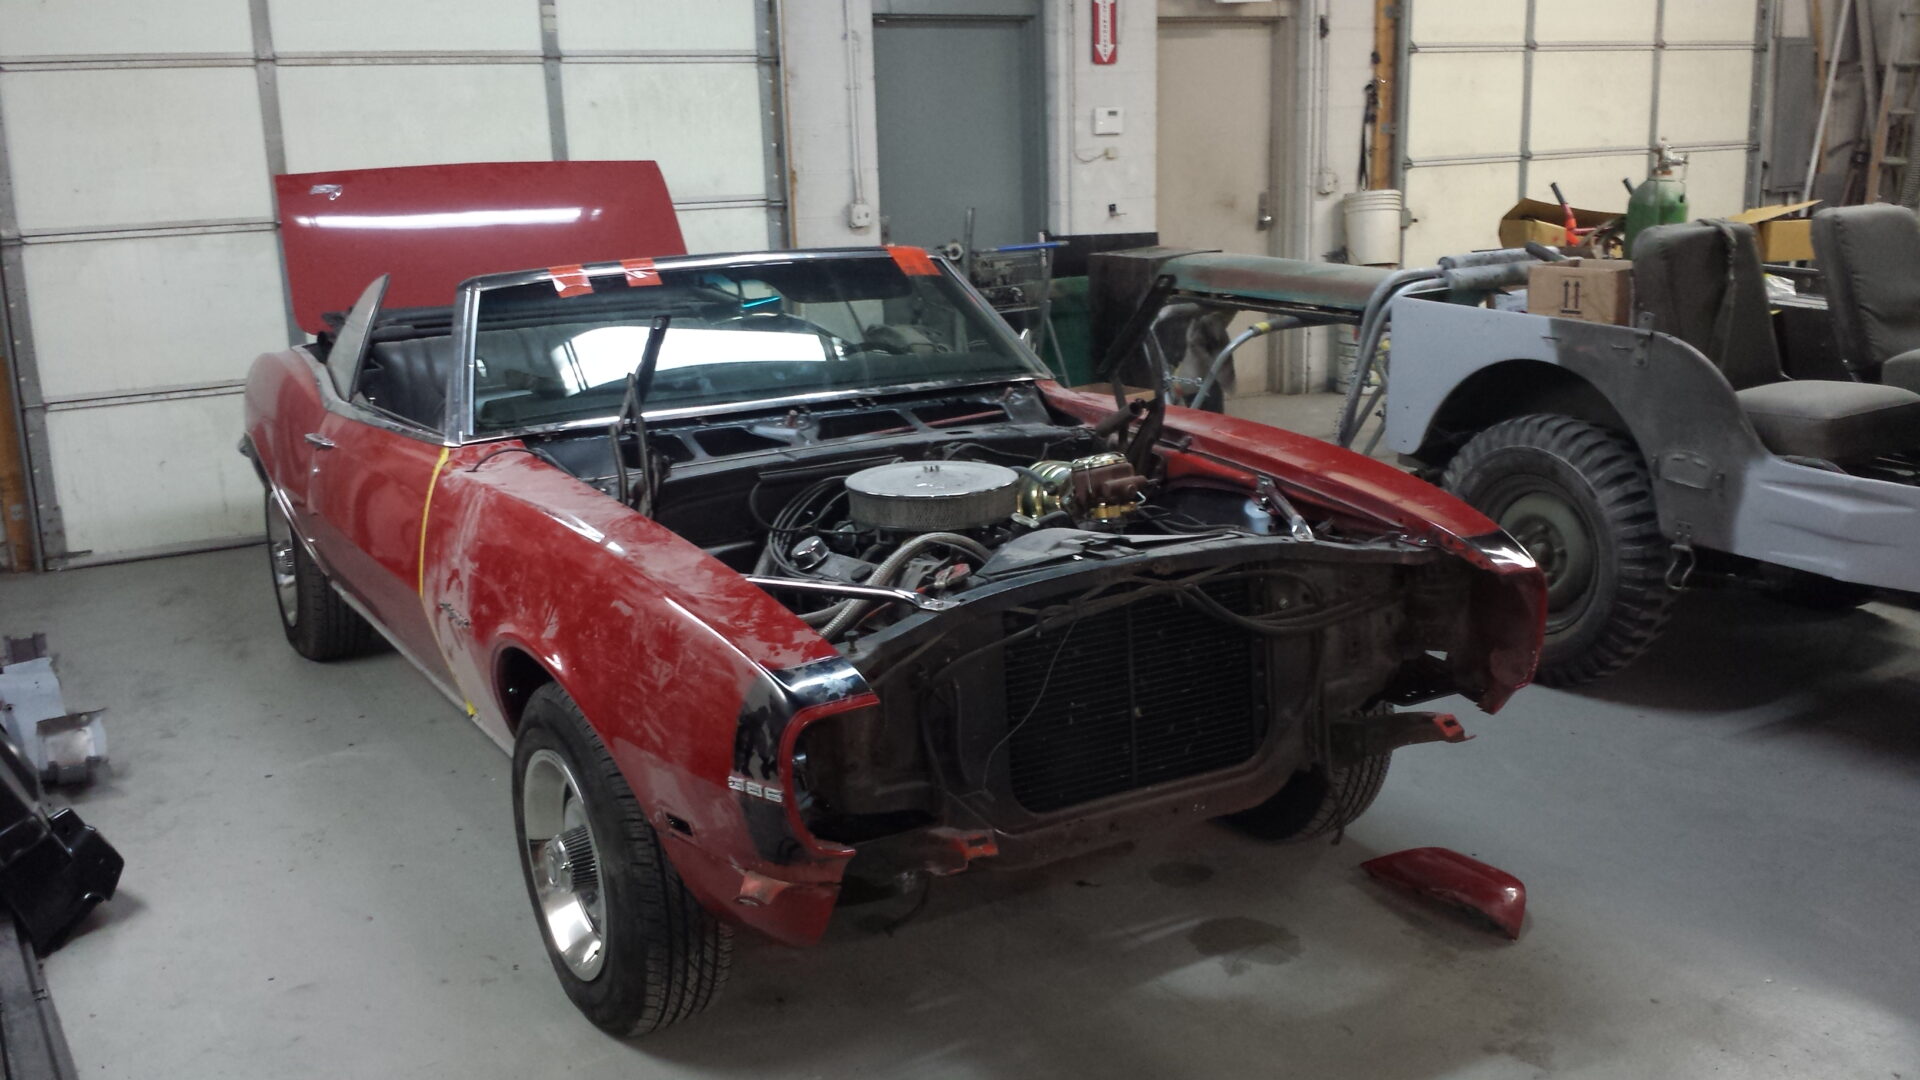 A partially disassembled 1968 Chevy Camaro